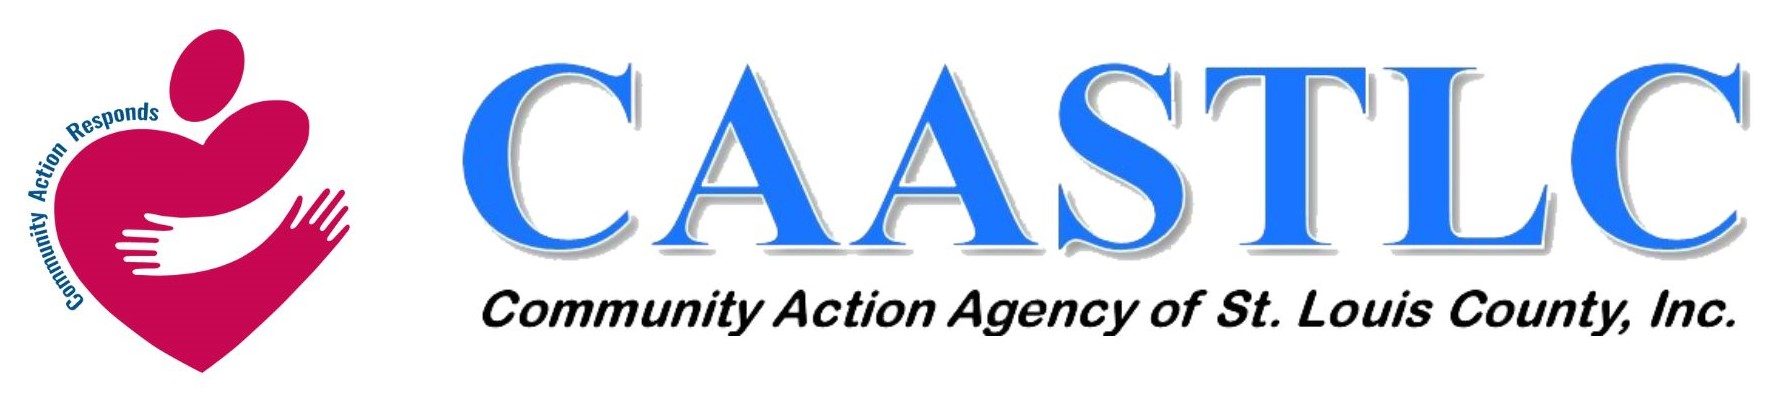 The_Community_Action_Agency_of_St.Louis_County